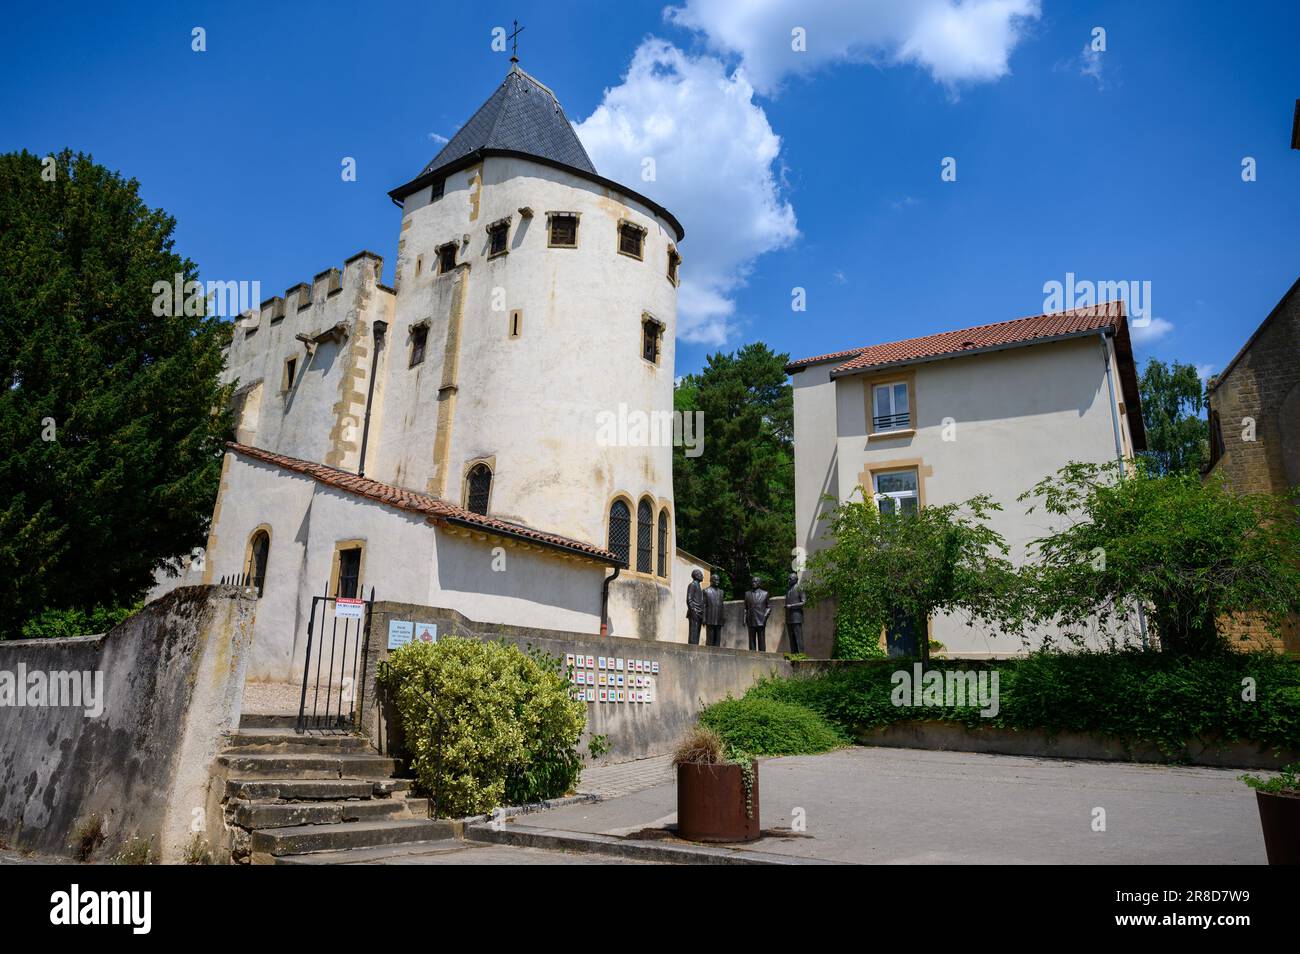 The Church of Saint-Quentin dating from the 12th century in which Robert Schuman, the Father of Europe, is buried. Scy-Chazelles, France. Stock Photo